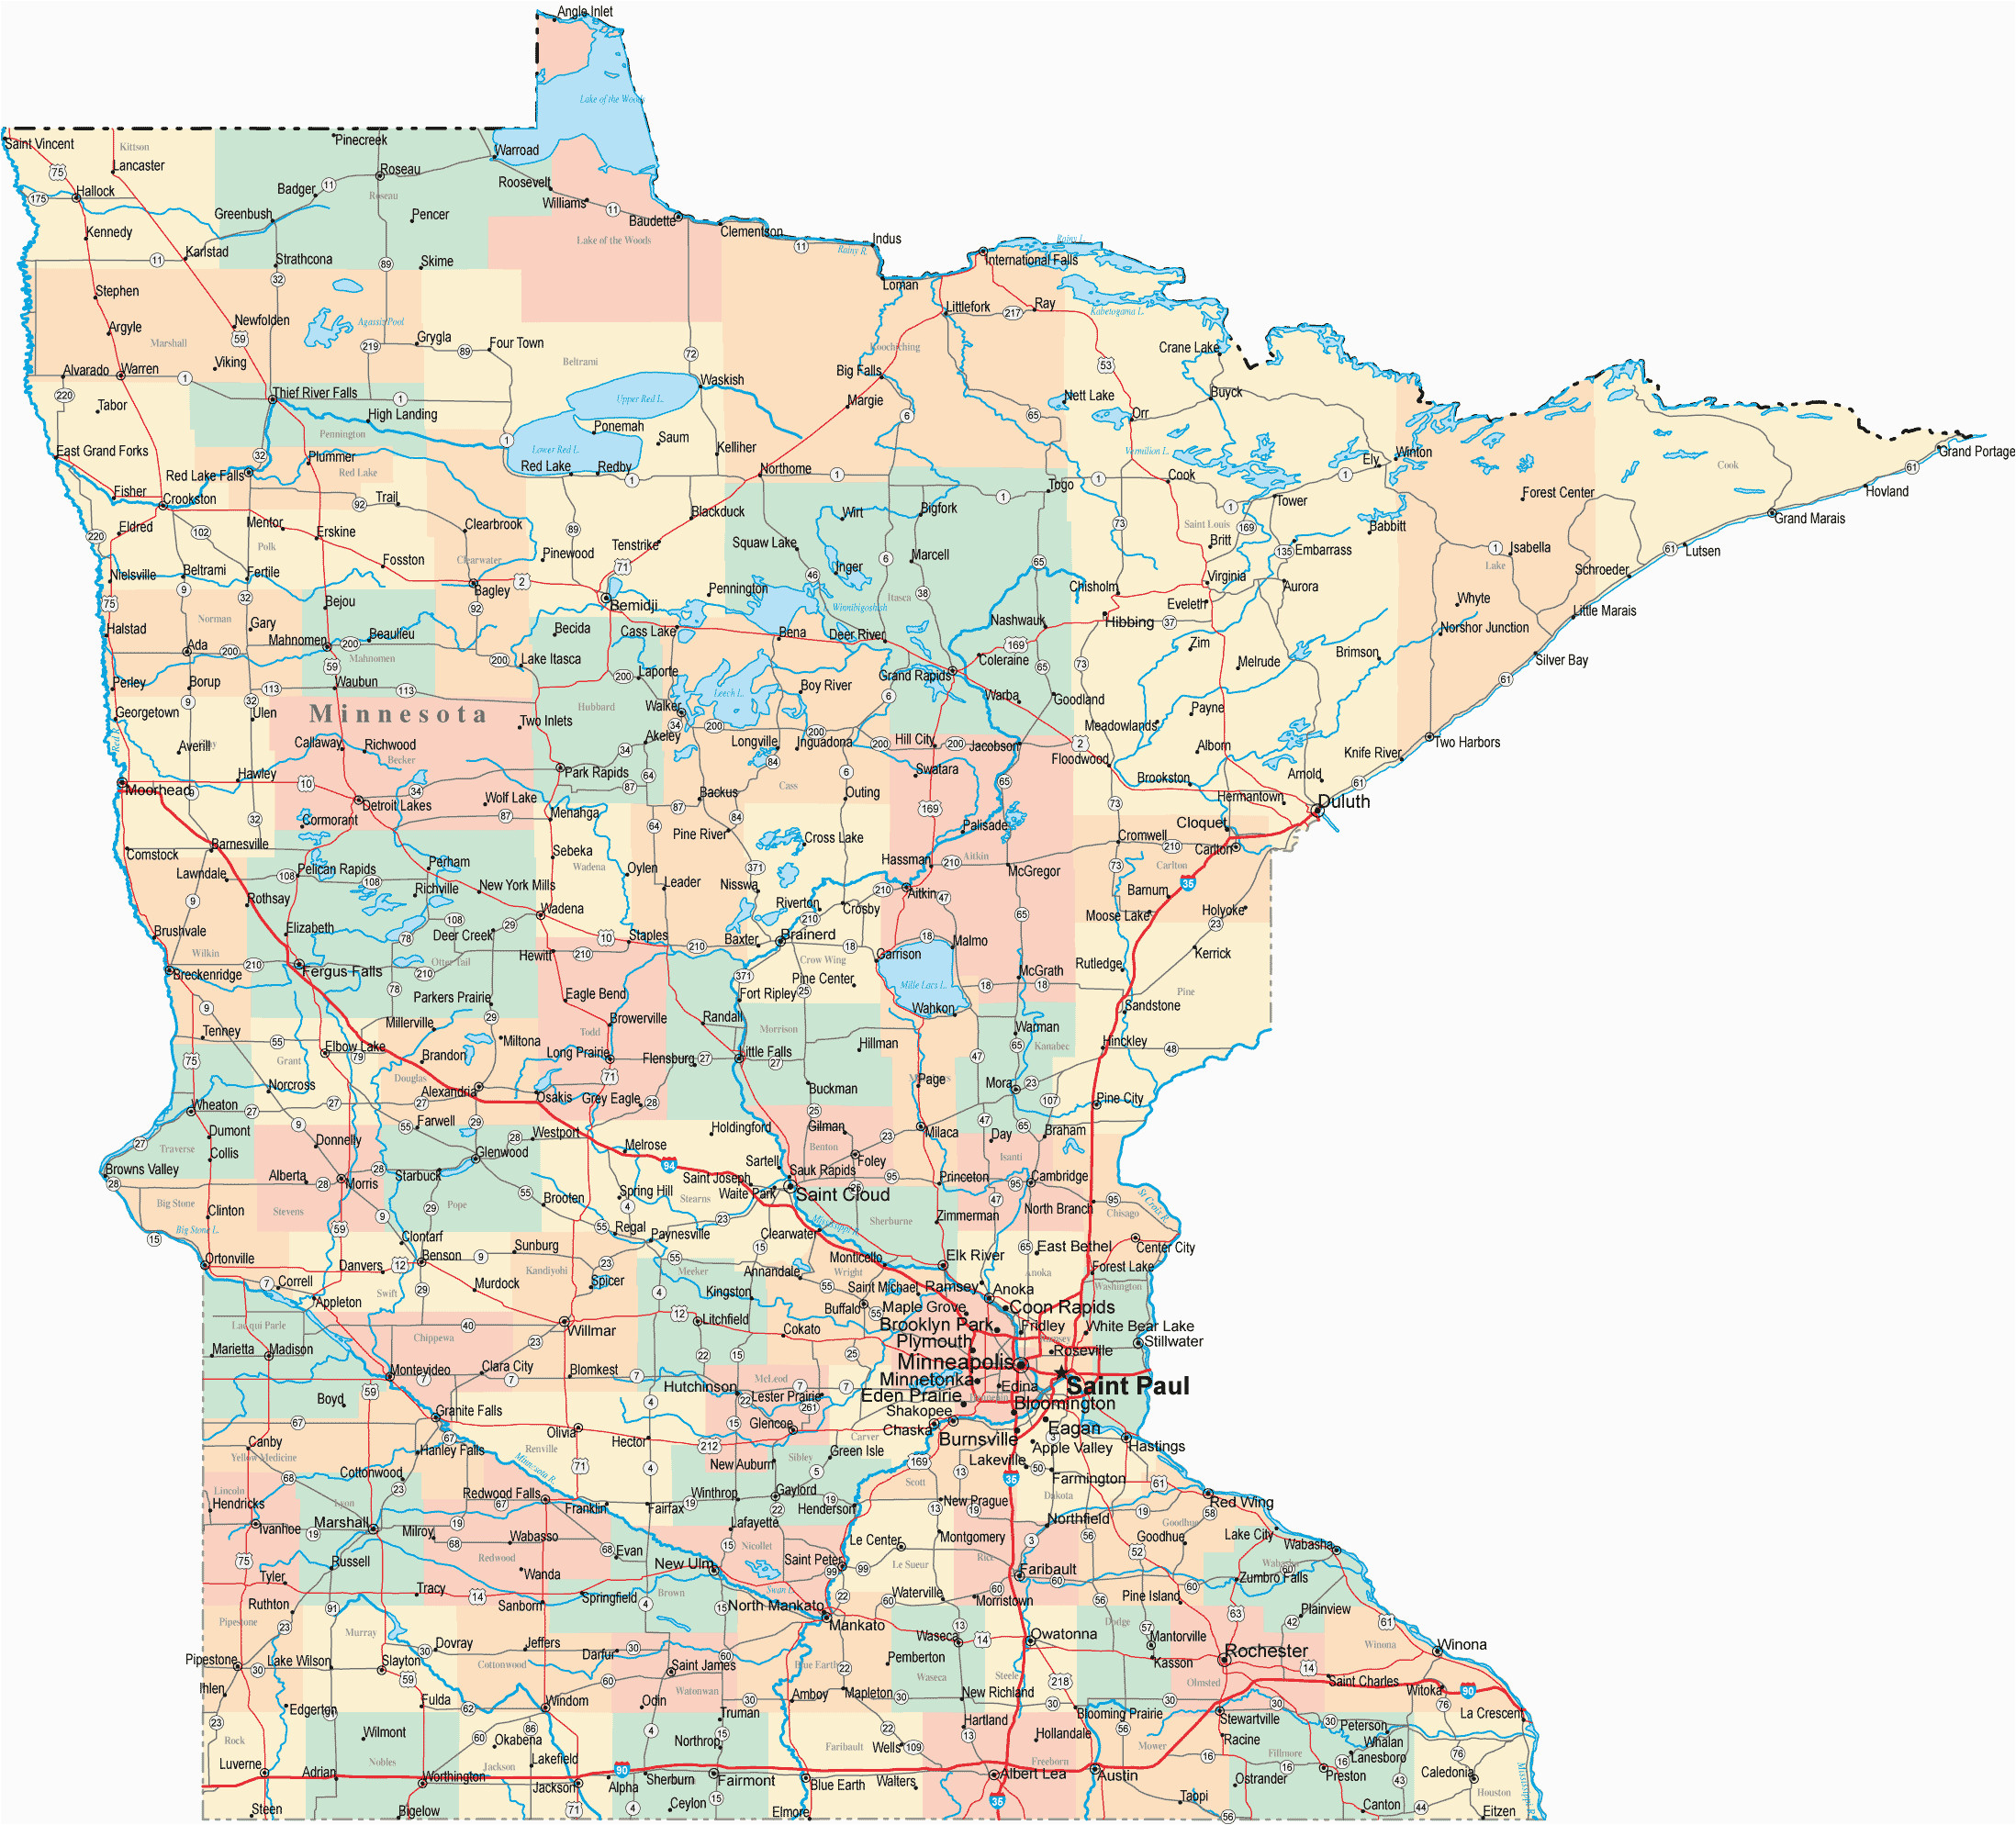 Minnesota County Maps with Cities Mn County Maps with Cities and Travel Information Download Free Mn